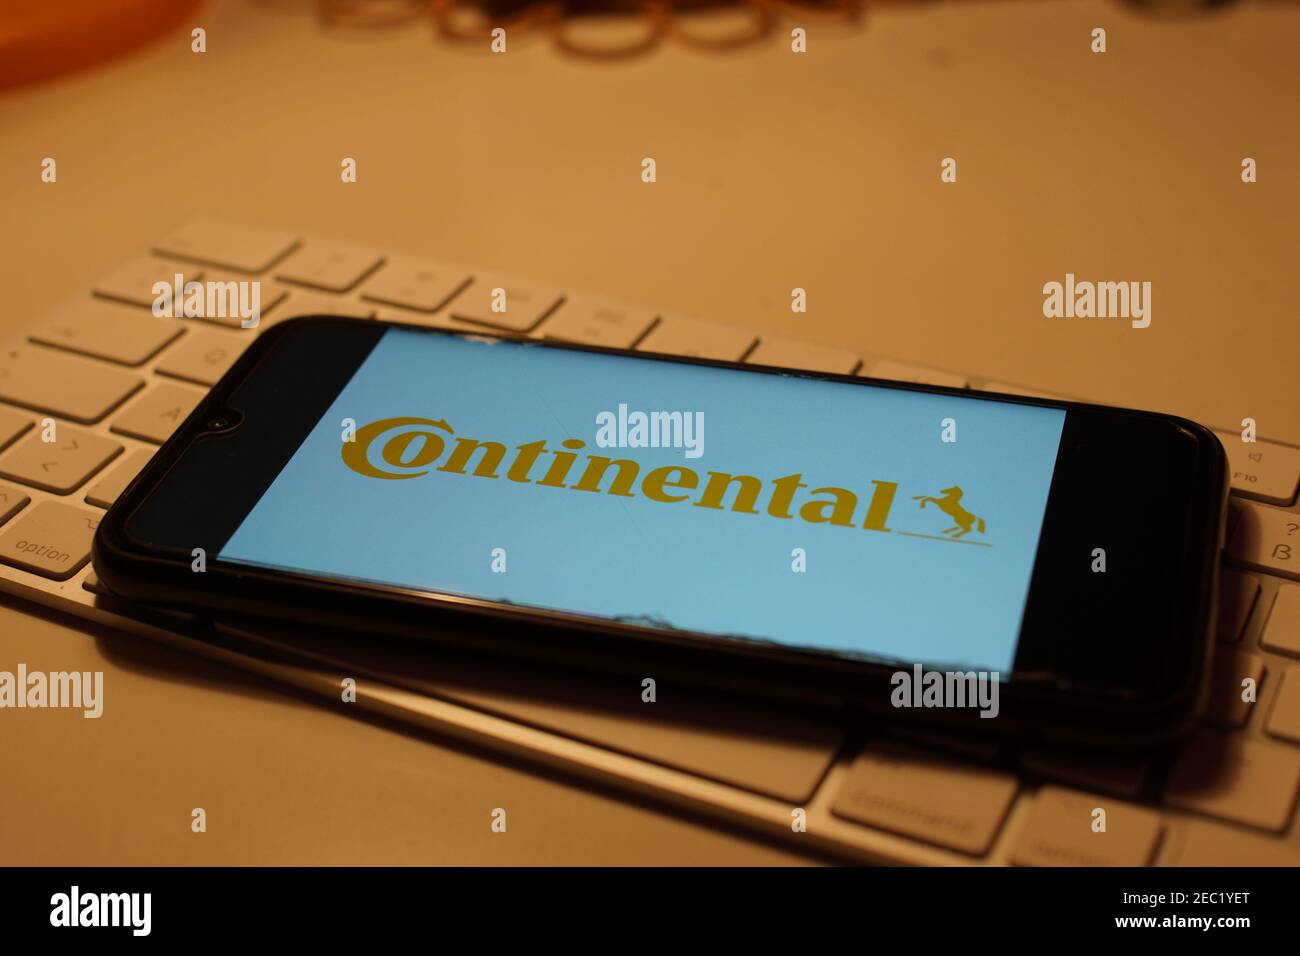 Smartphone with Continental logo on computer keyboard Stock Photo